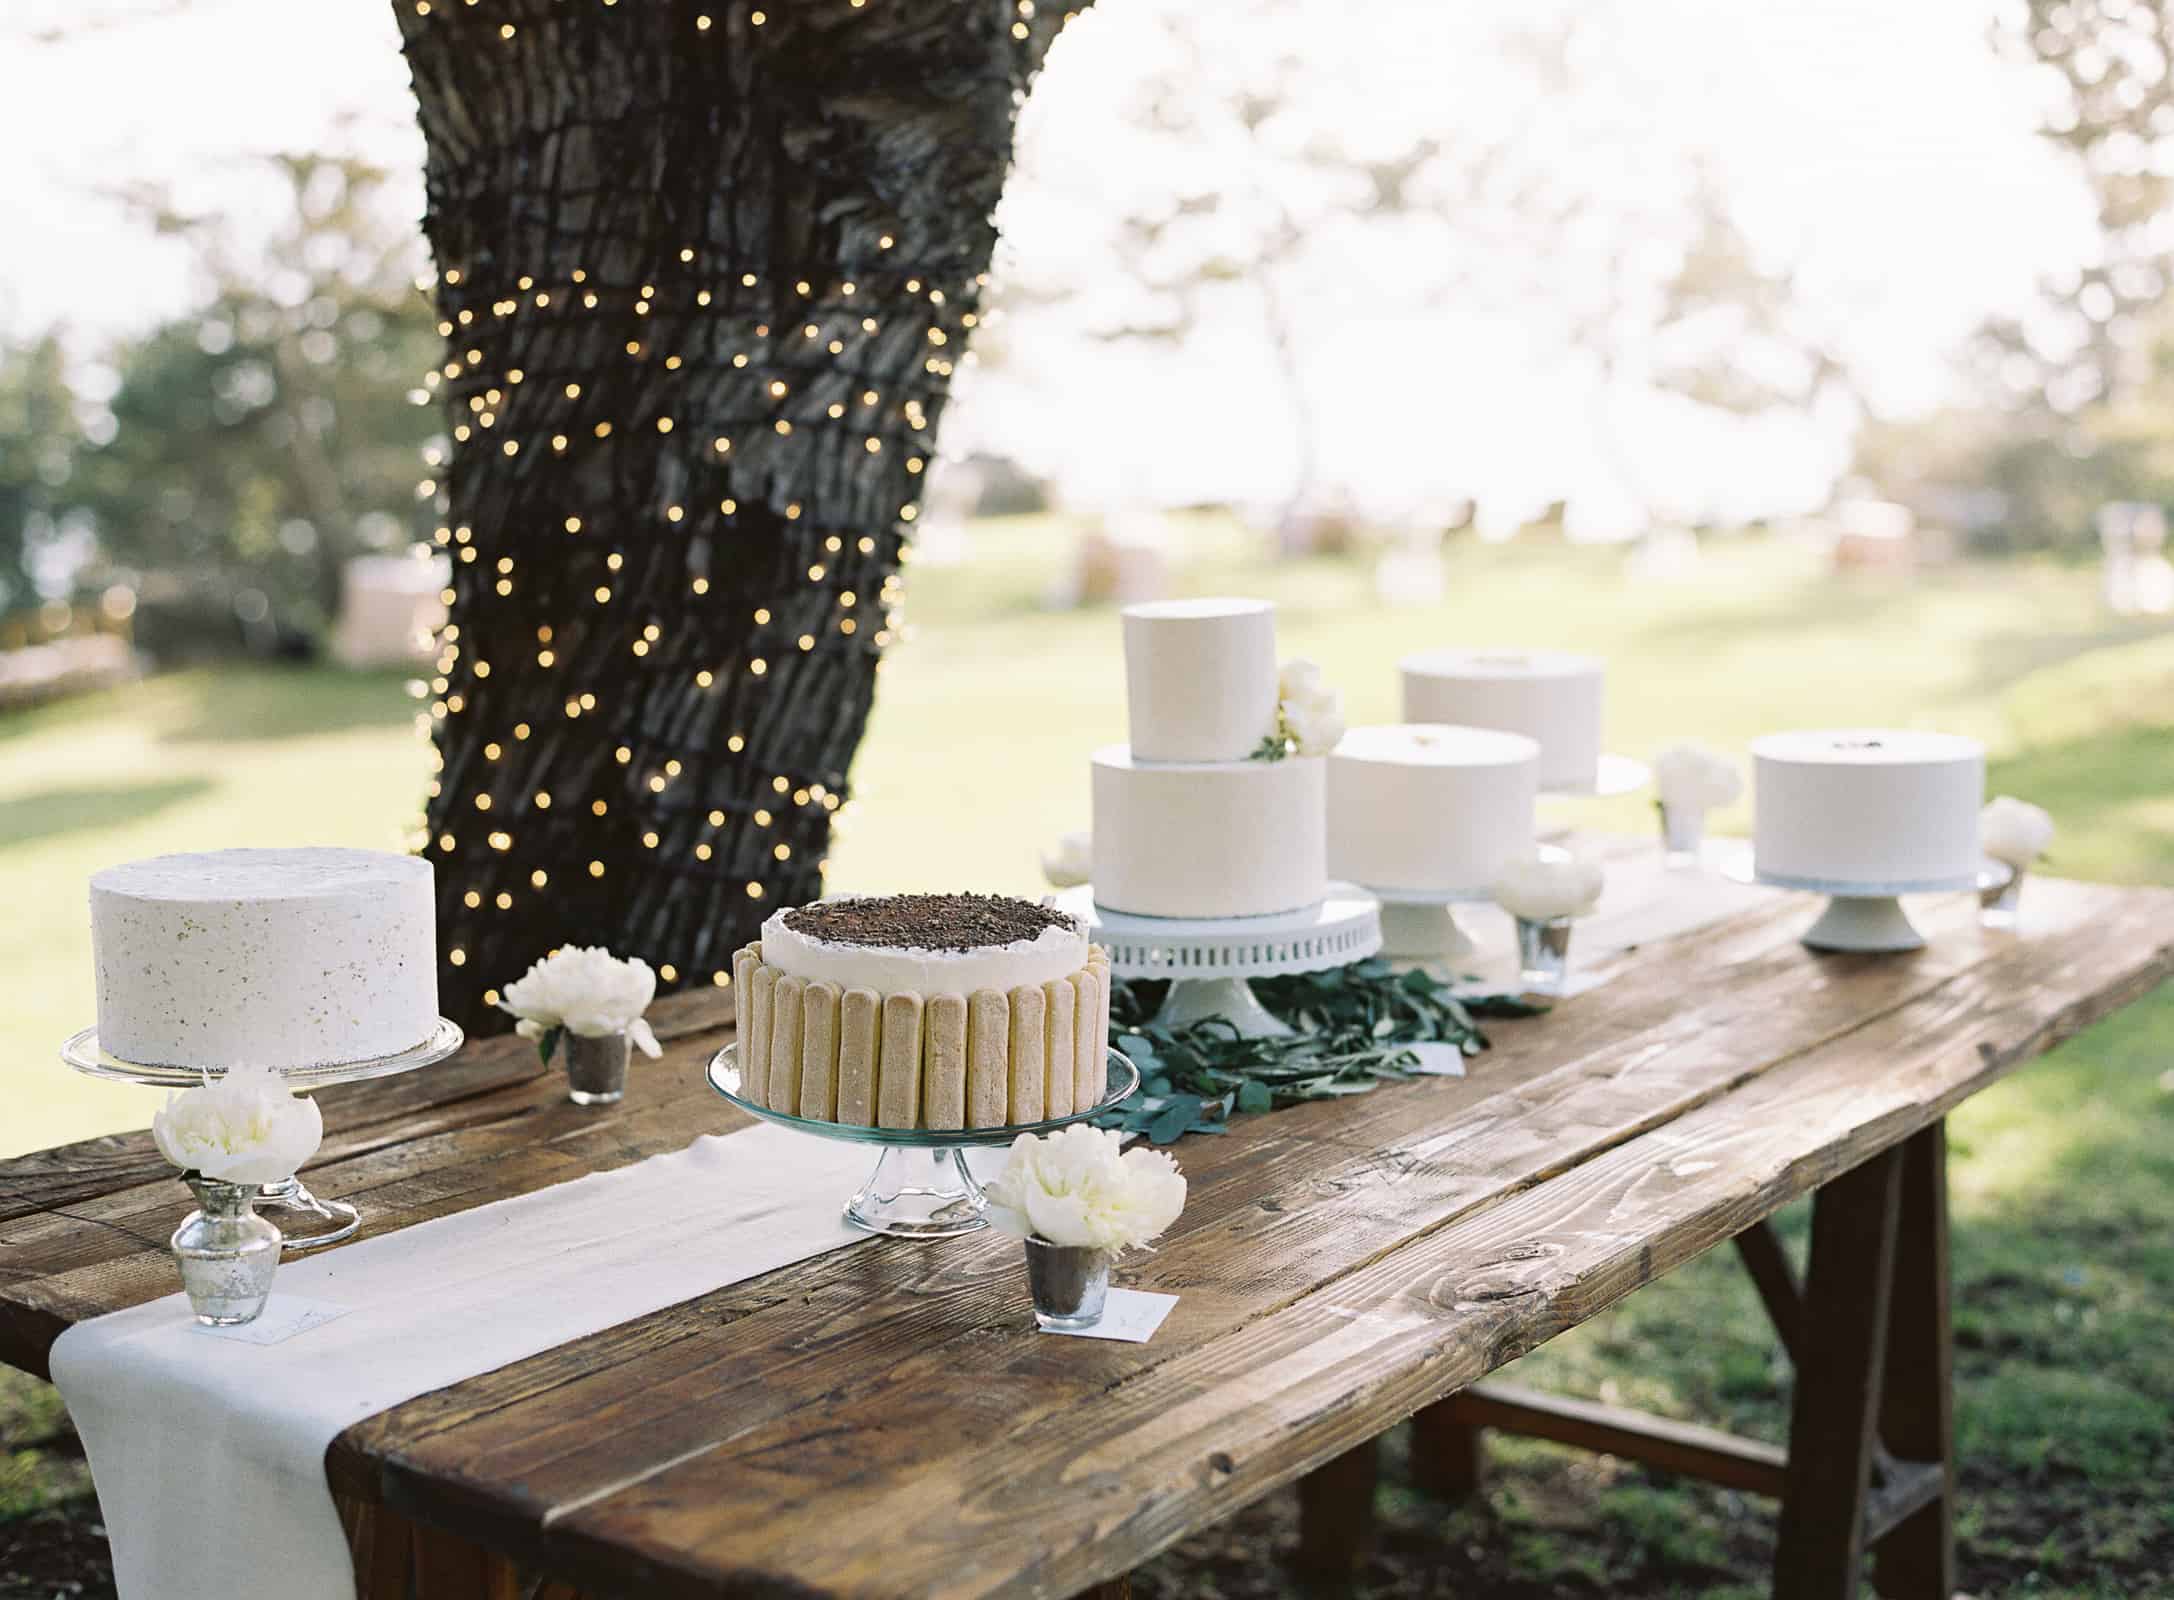 rustic table with assorted white cakes